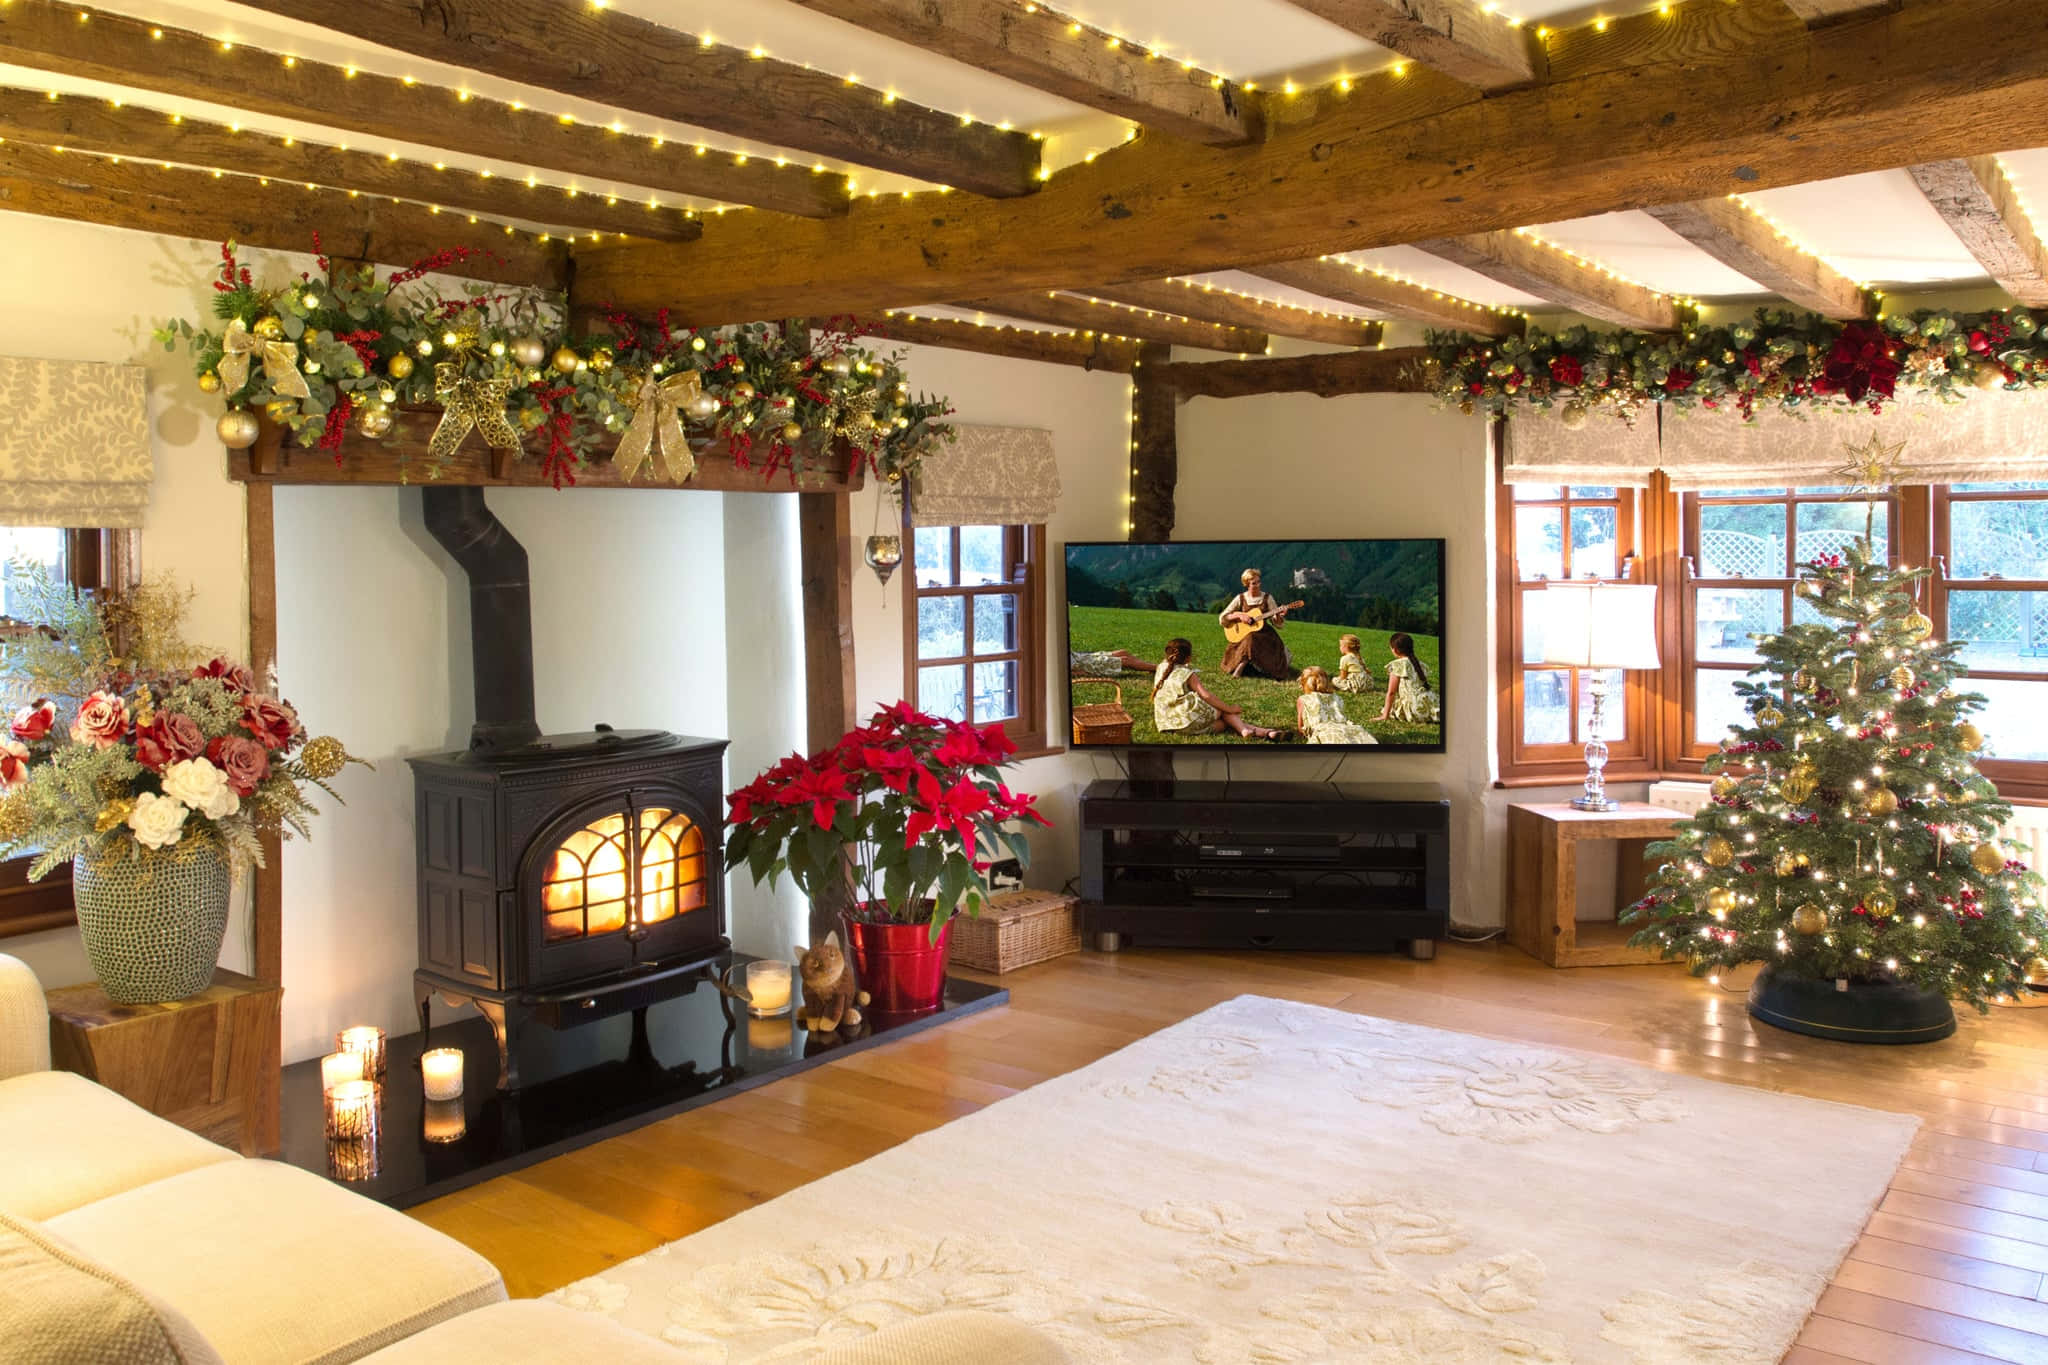 A Living Room With A Fireplace And Christmas Decorations